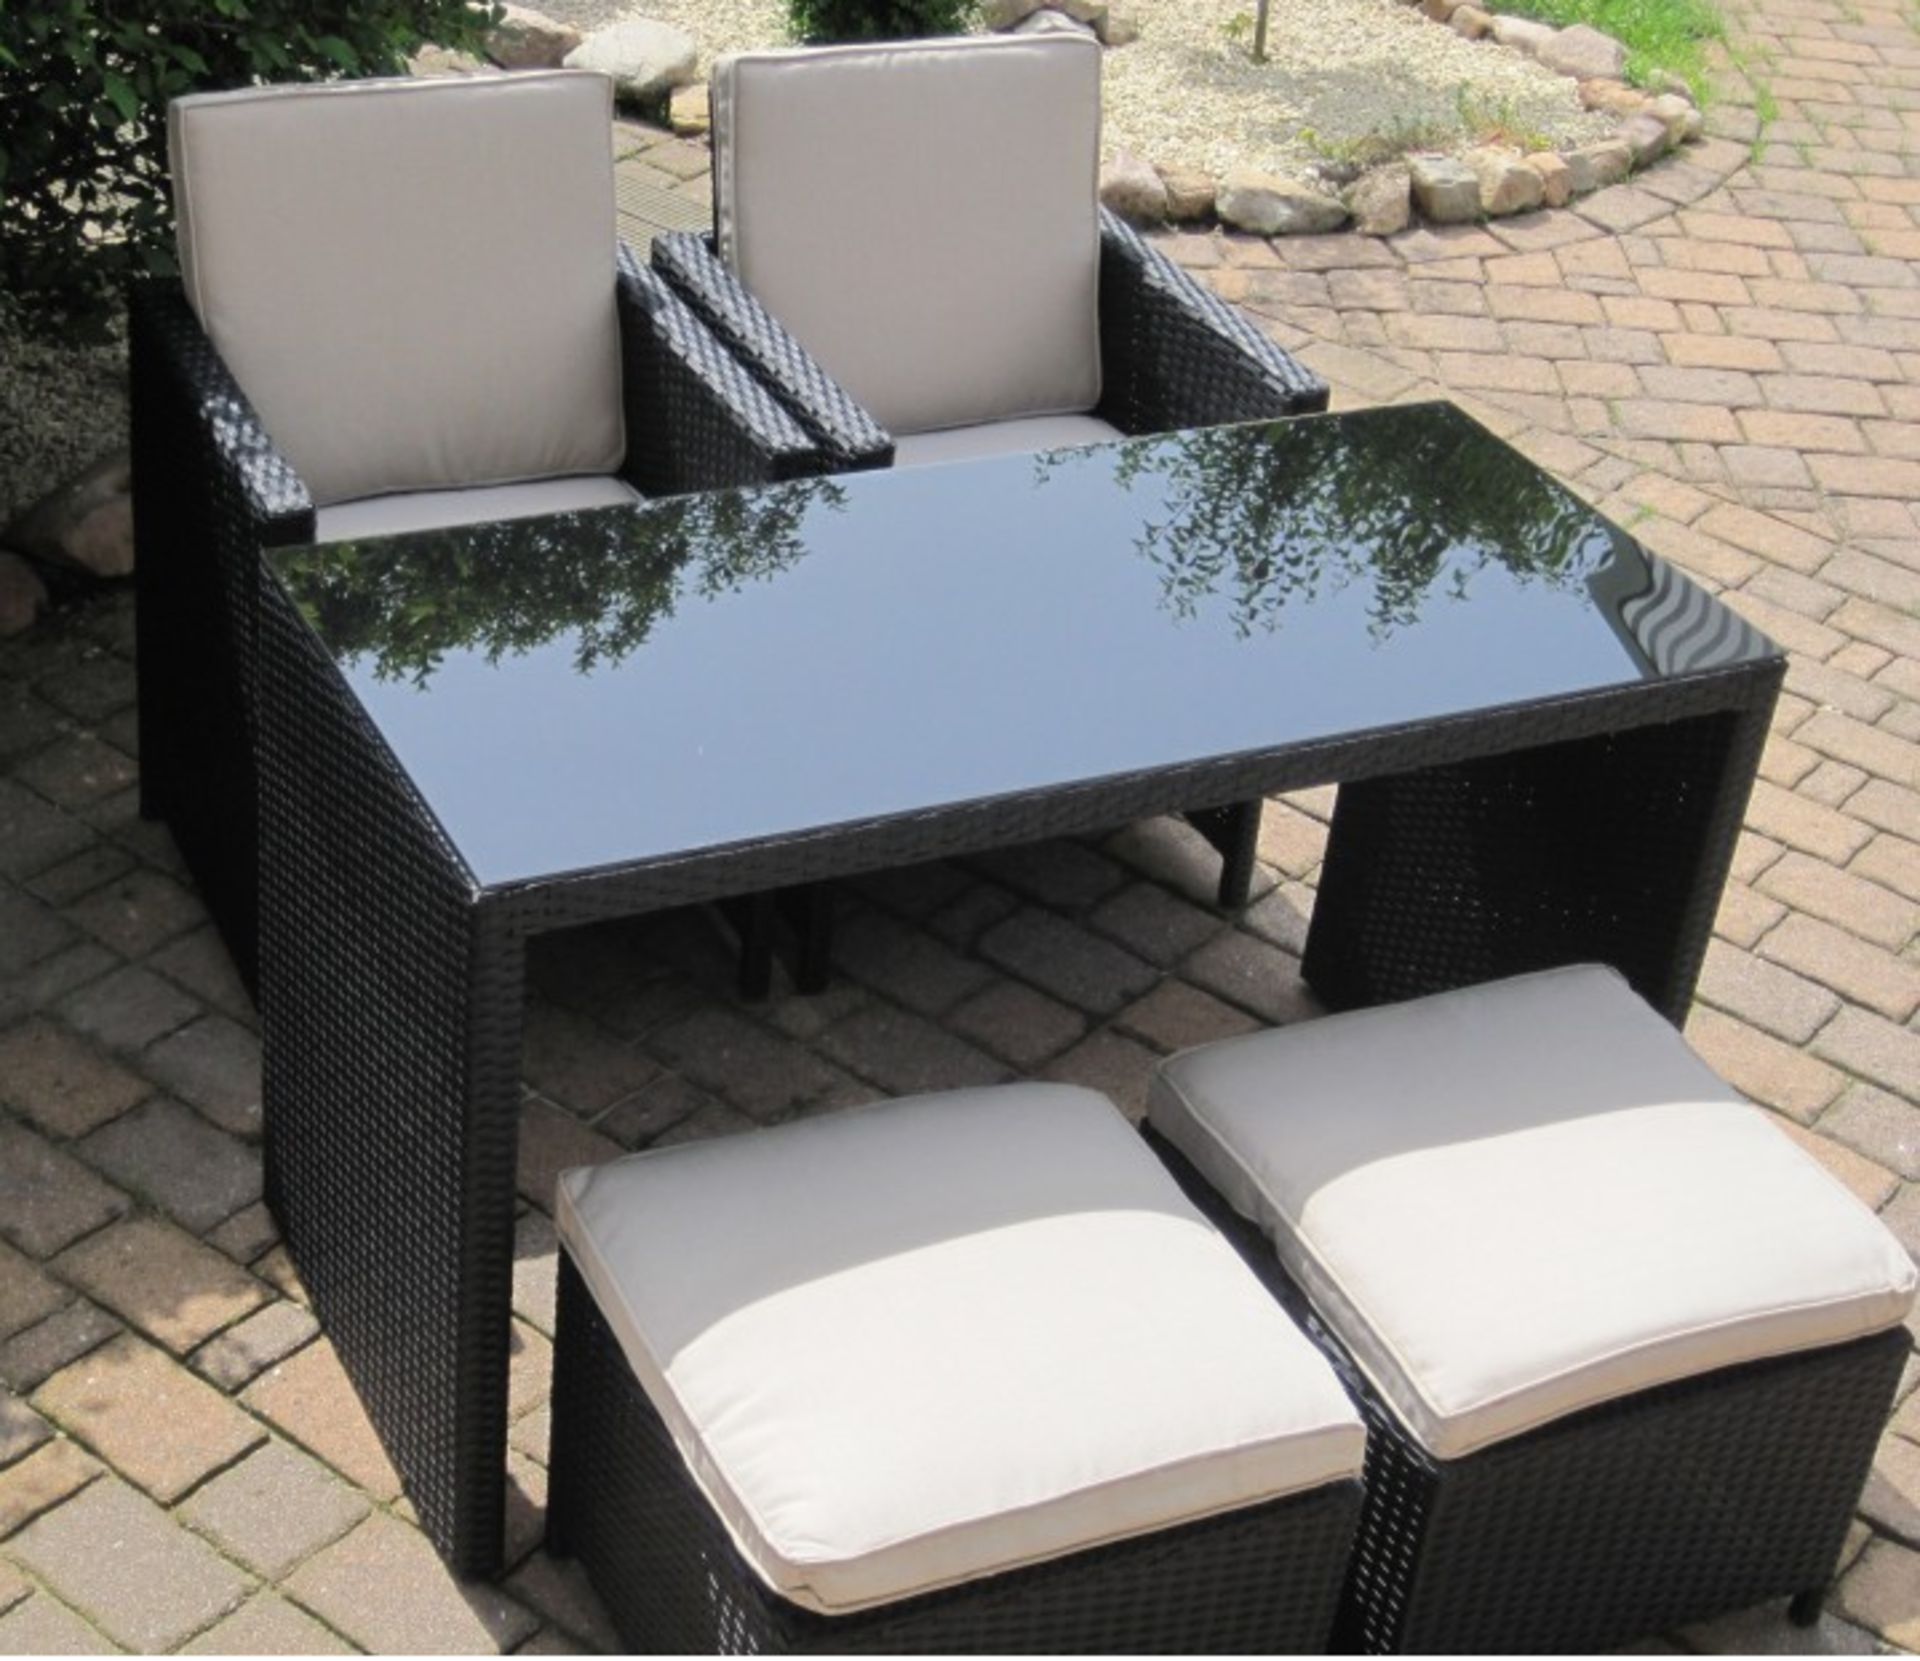 NEW Toscana balcony furniture set in Natural - Image 5 of 13